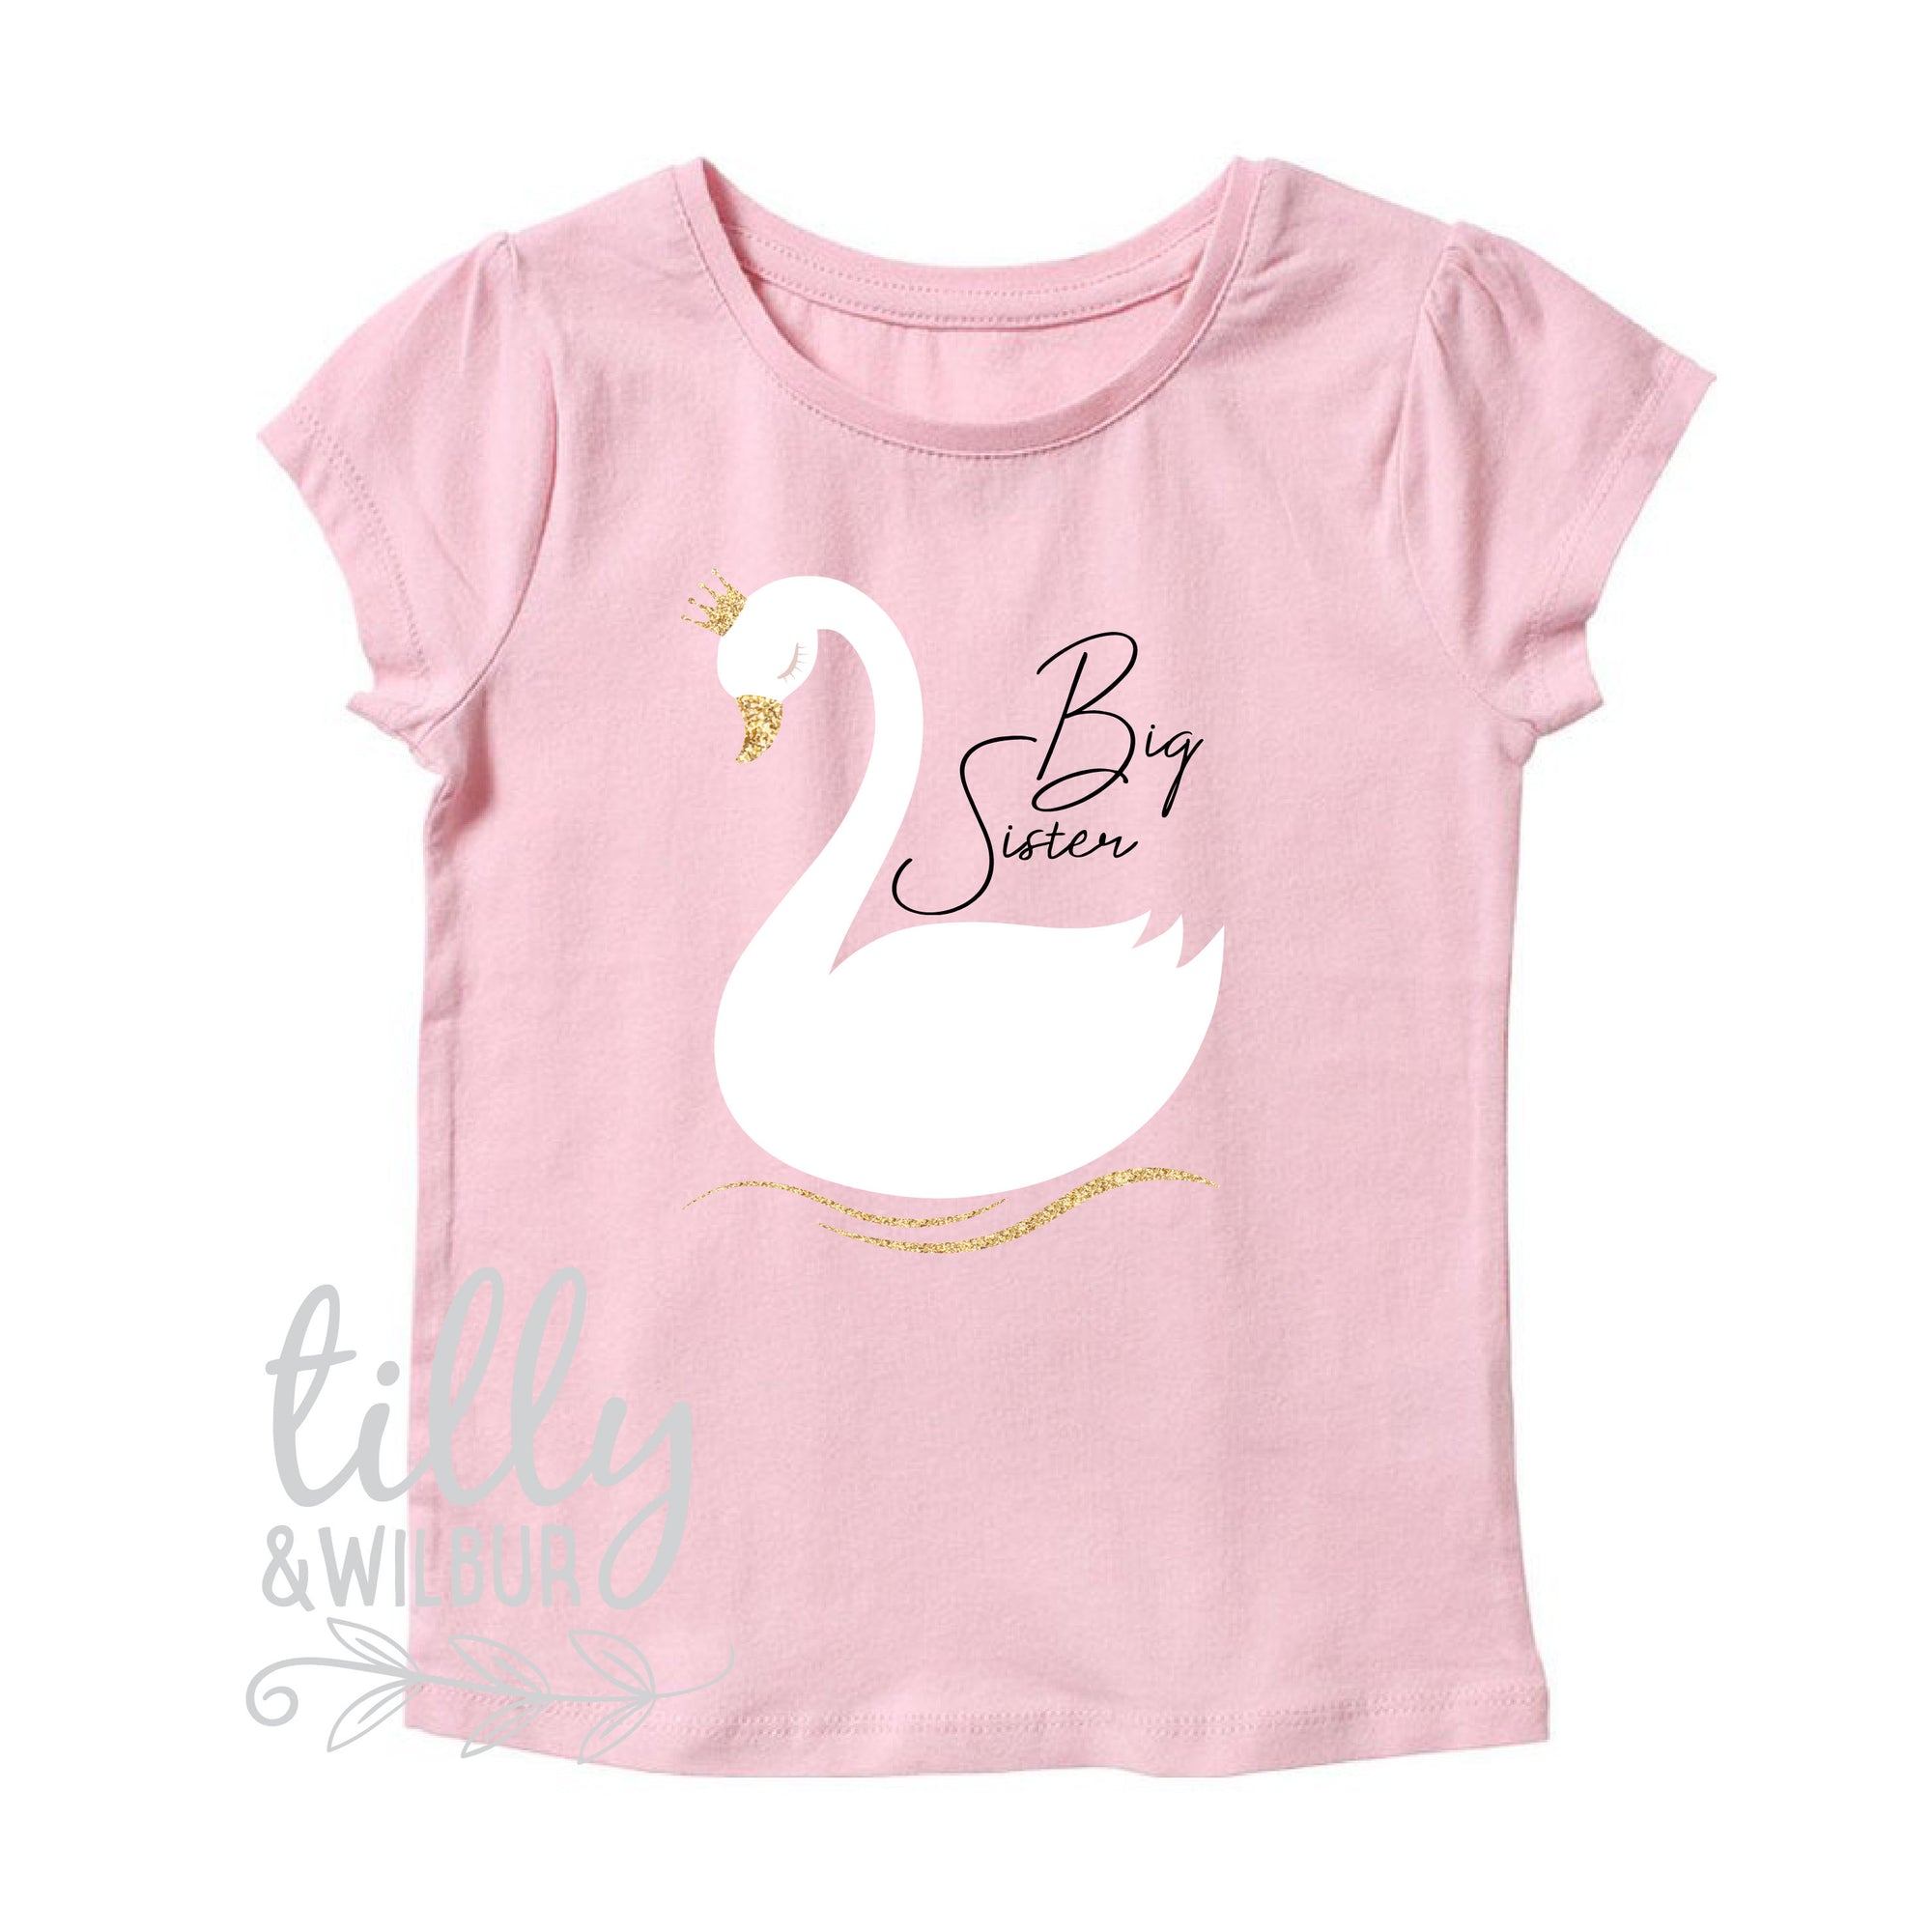 I'm Getting Promoted To Big Sister Girl's T-Shirt, Big Sister T-Shirt, I'm Going To Be A Big Sister, Big Sister Swan, Pregnancy Announcement